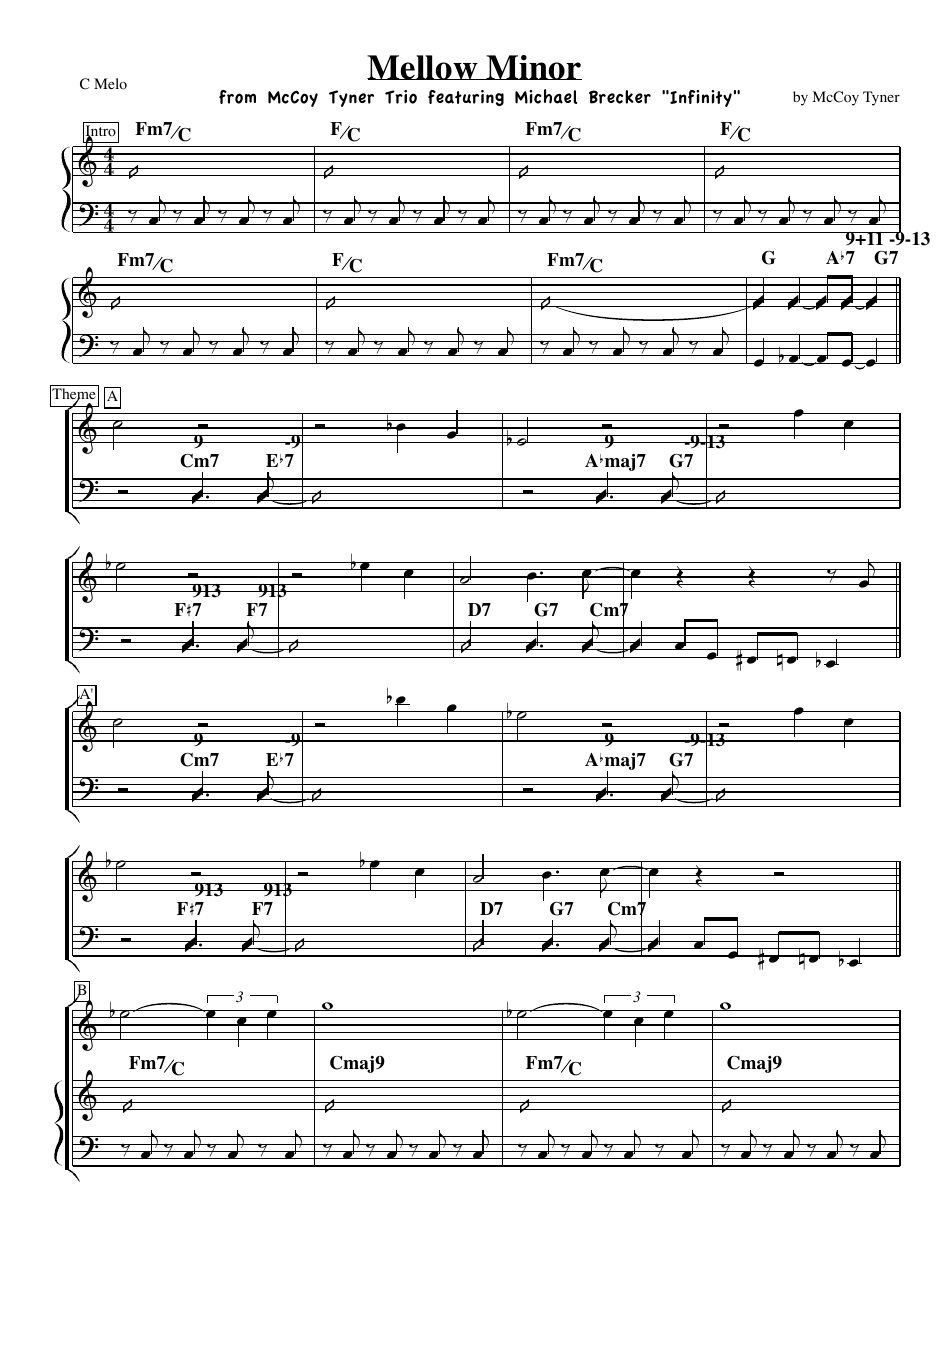 McCoy Tyner Mellow Minor Sheet Music - Preview Image